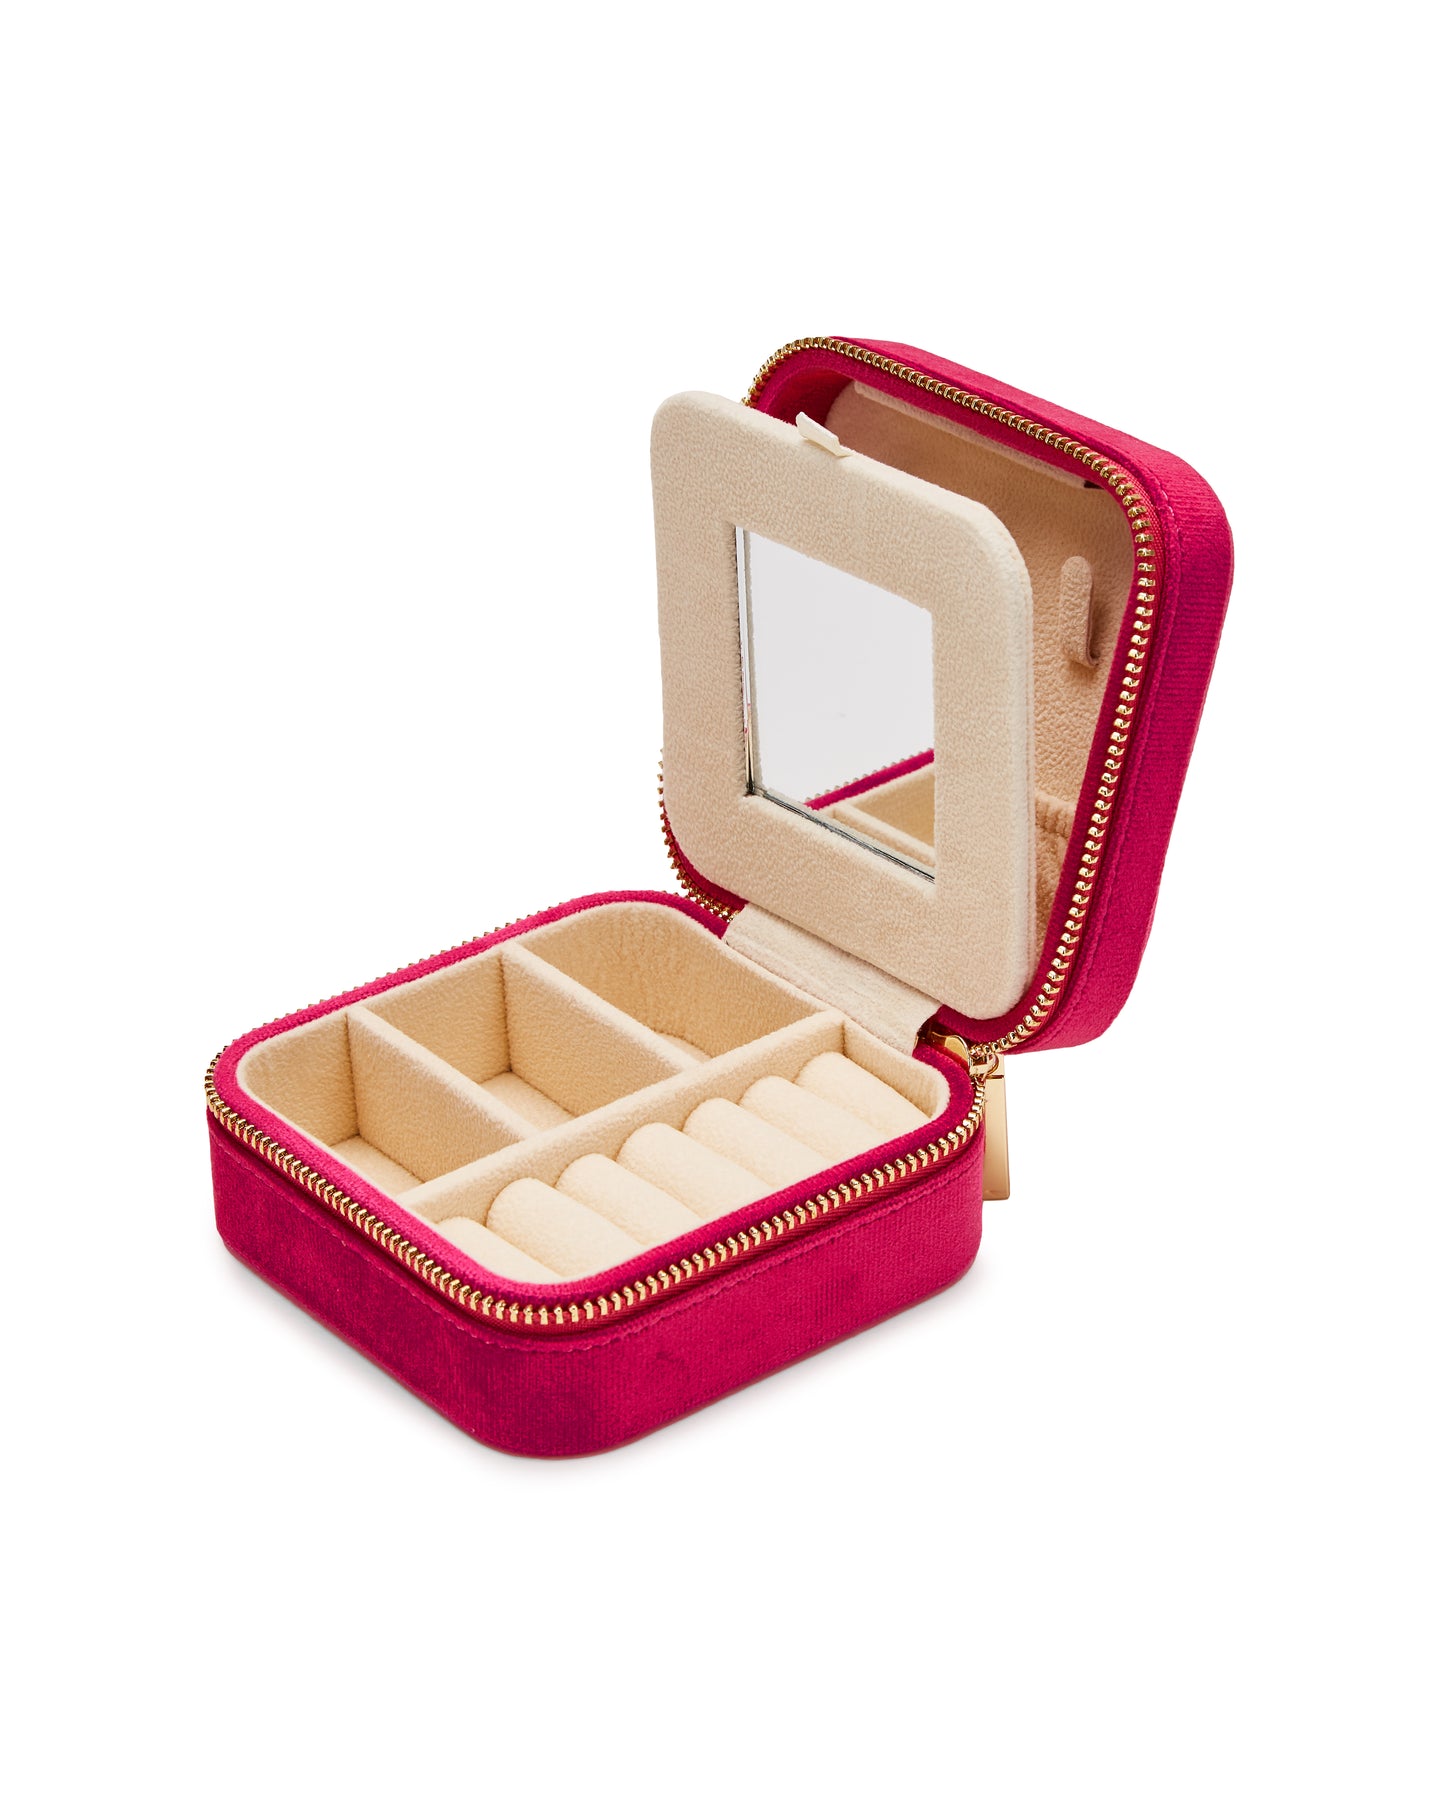 VELVET JEWELRY BOX col. framboise, directly orderable - 5 pieces